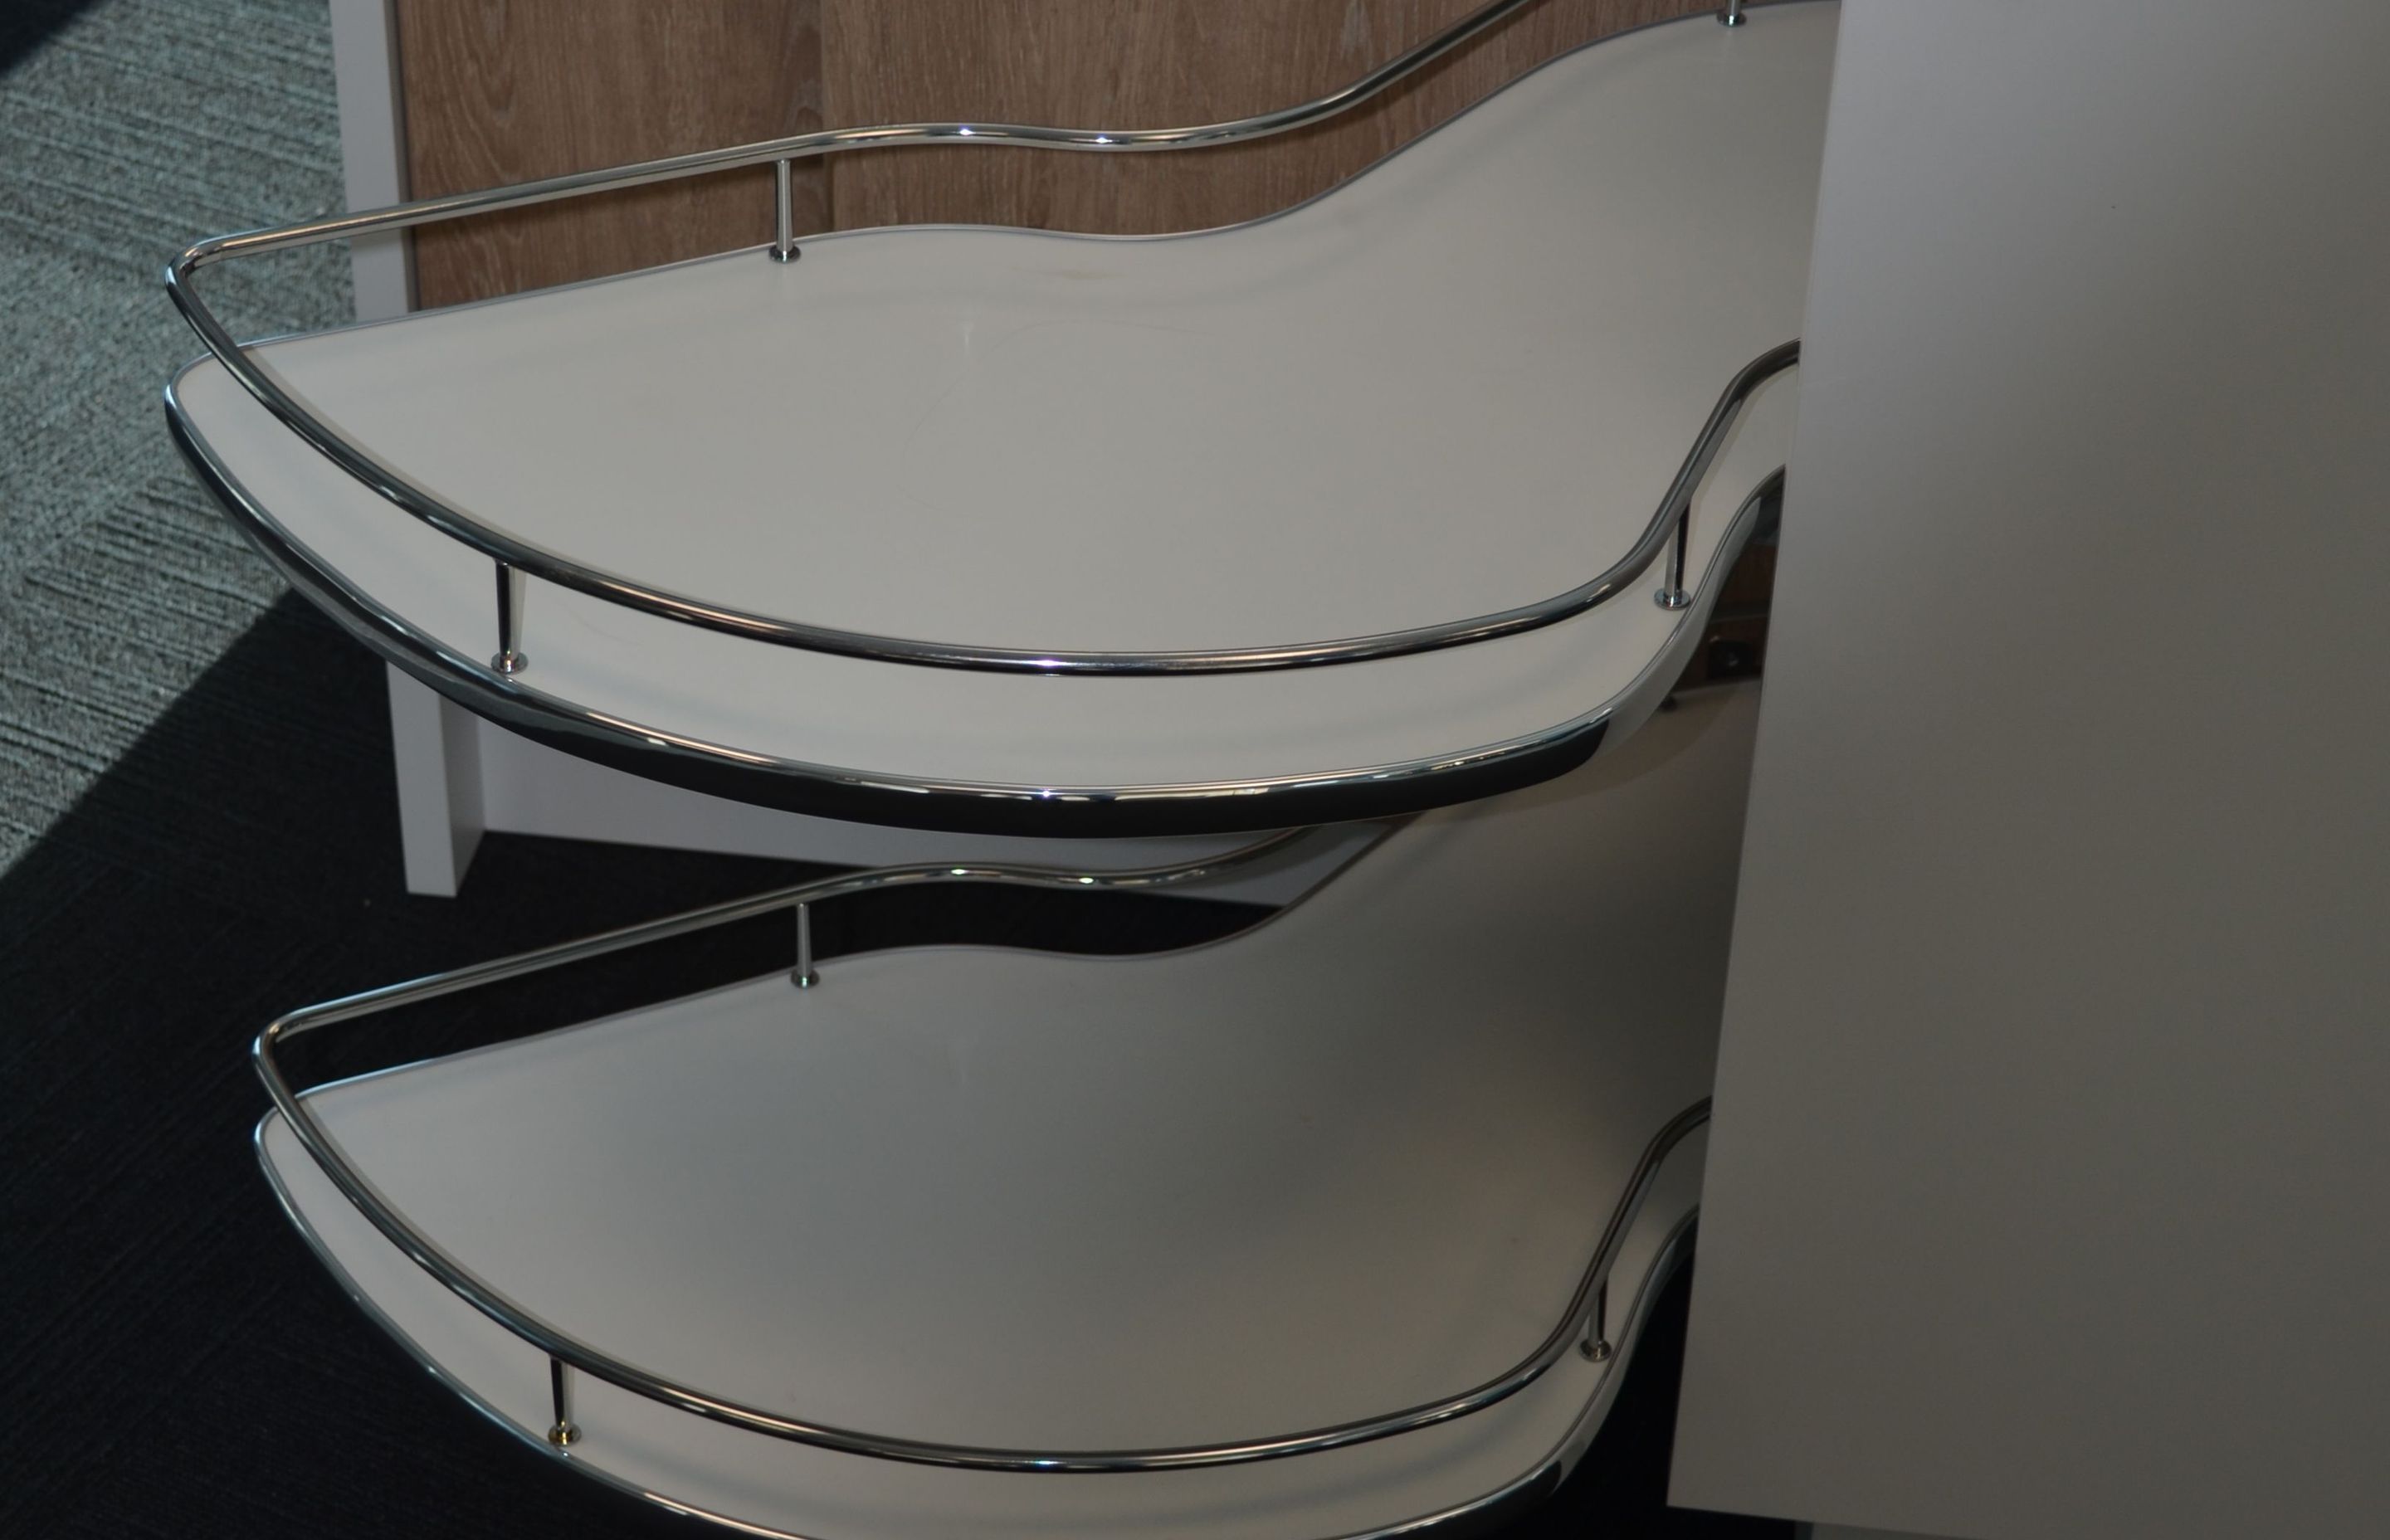 Fit Showroom Christchurch - Giamo Duplo for Blind Corner Cabinets 4